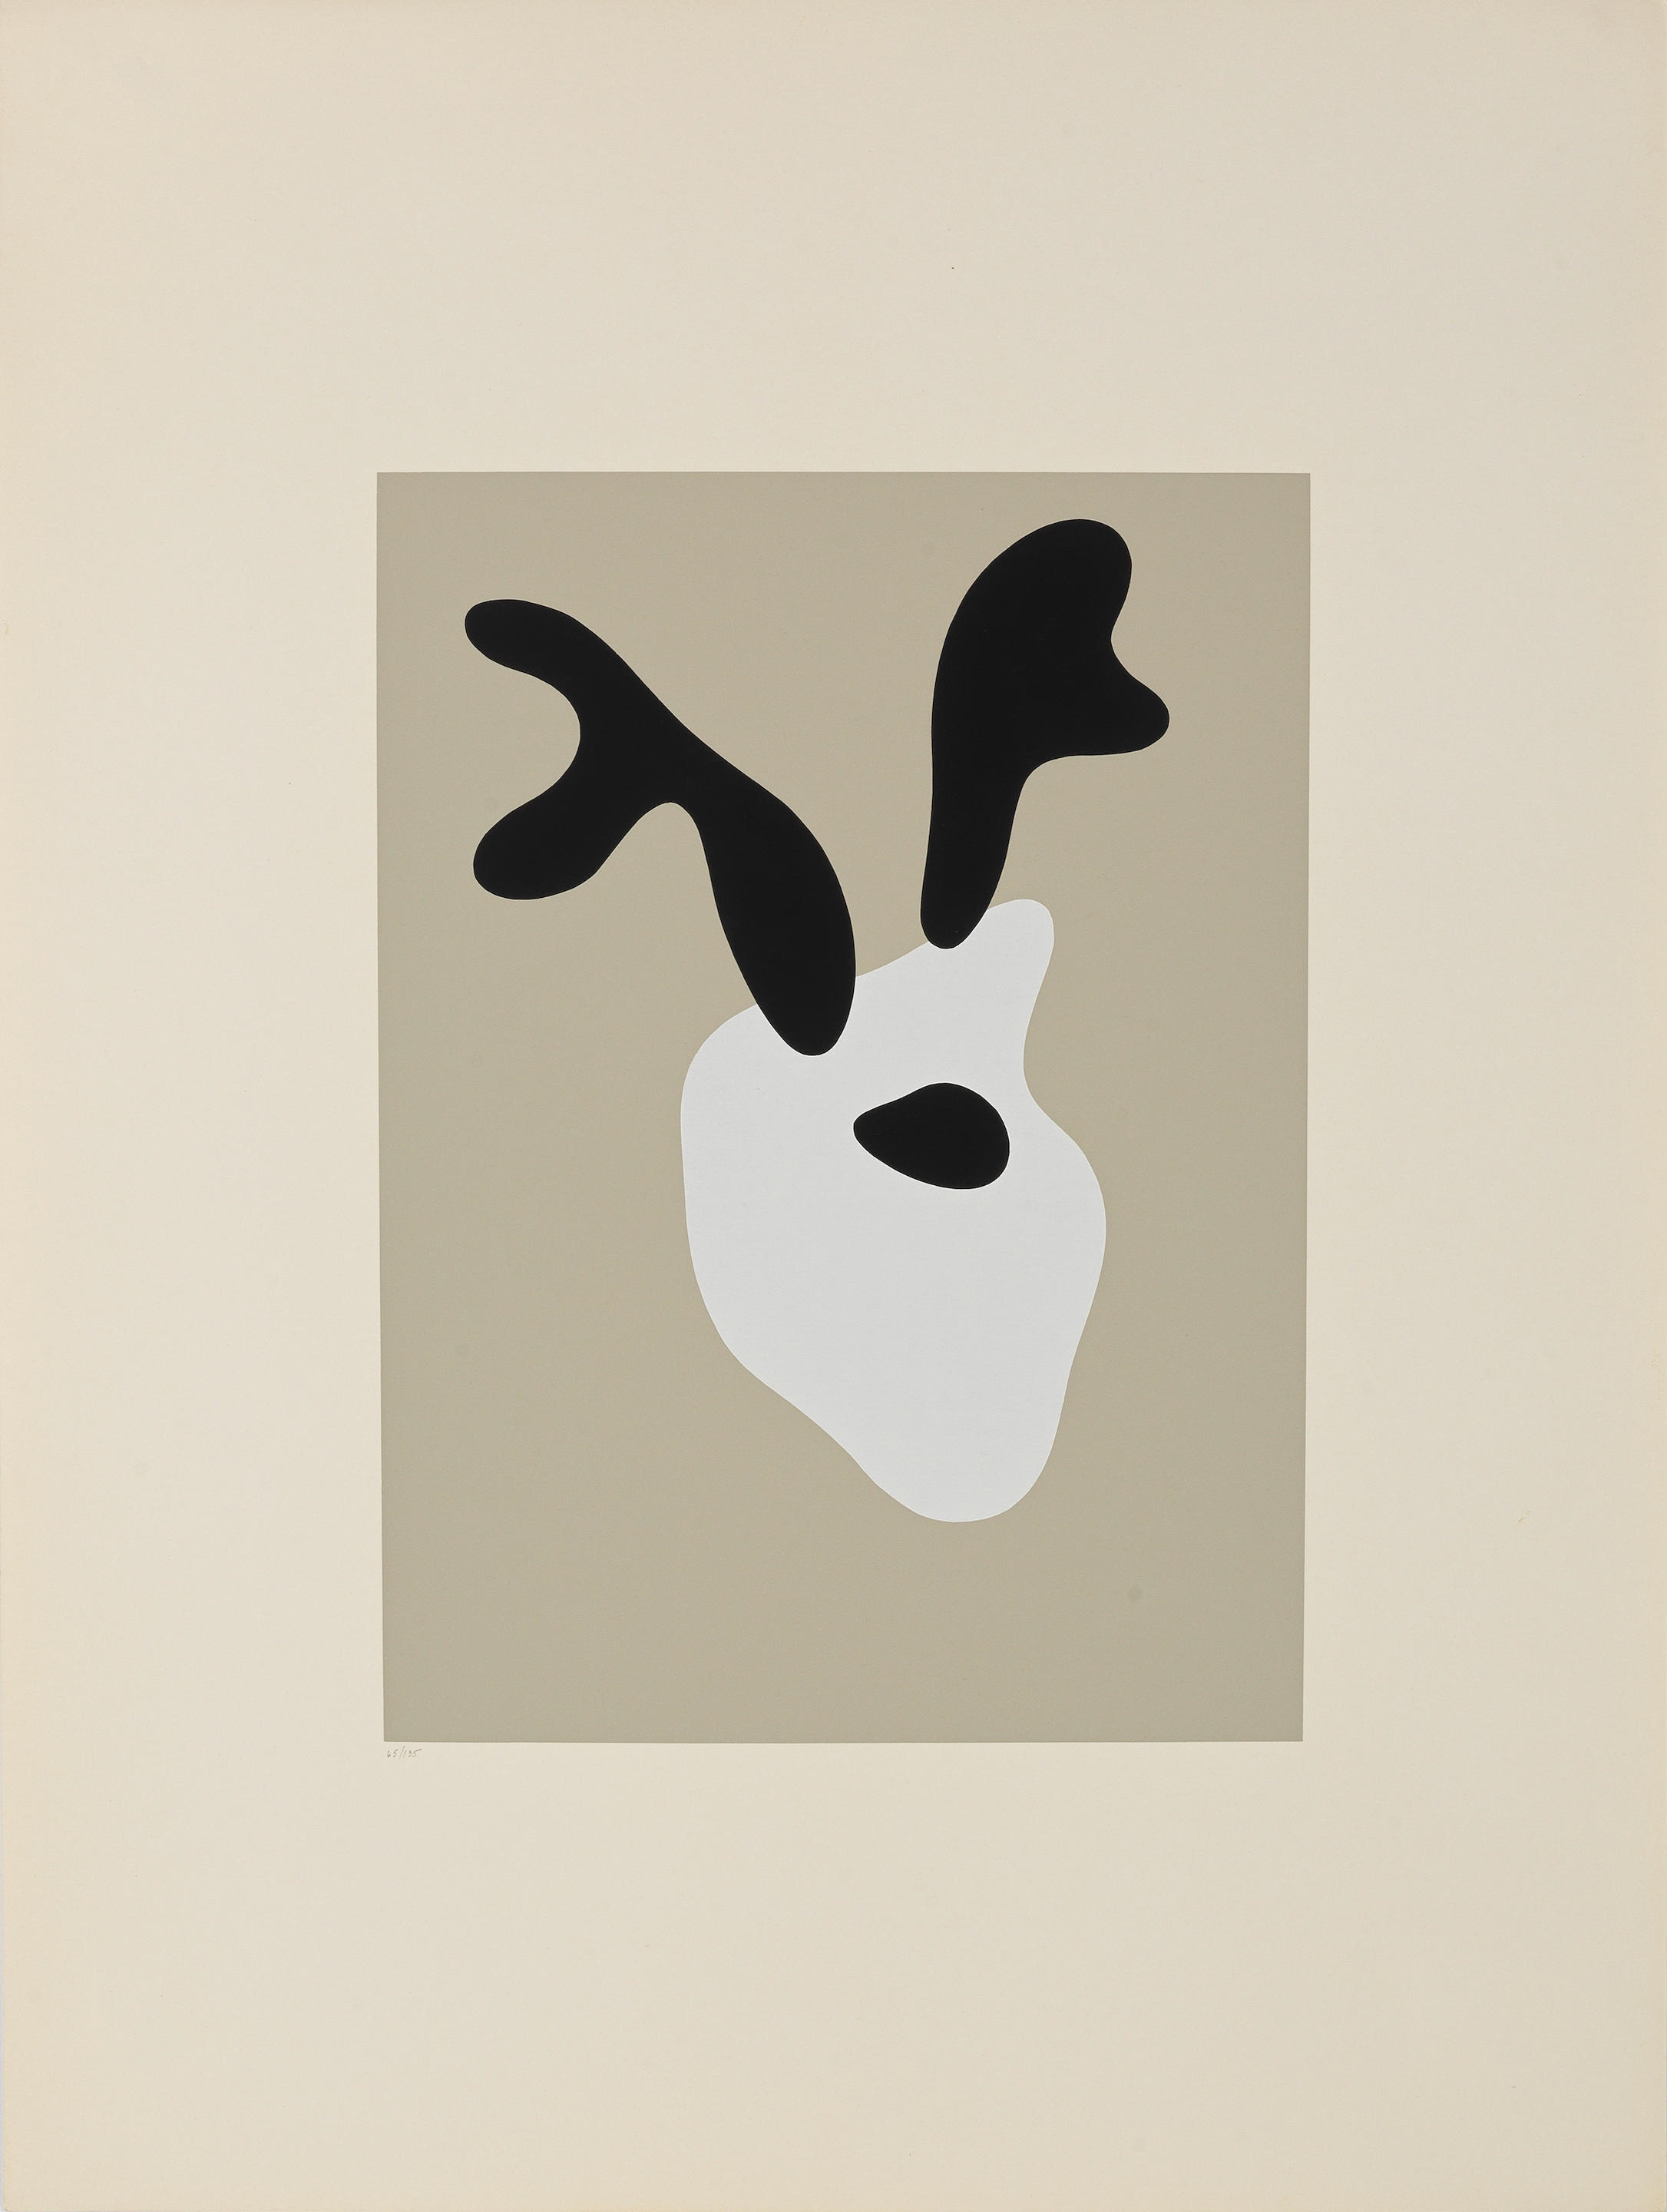 Artwork by Jean Arp, Arp, Made of screenprints in colours and one collage, 1959, on wove paper